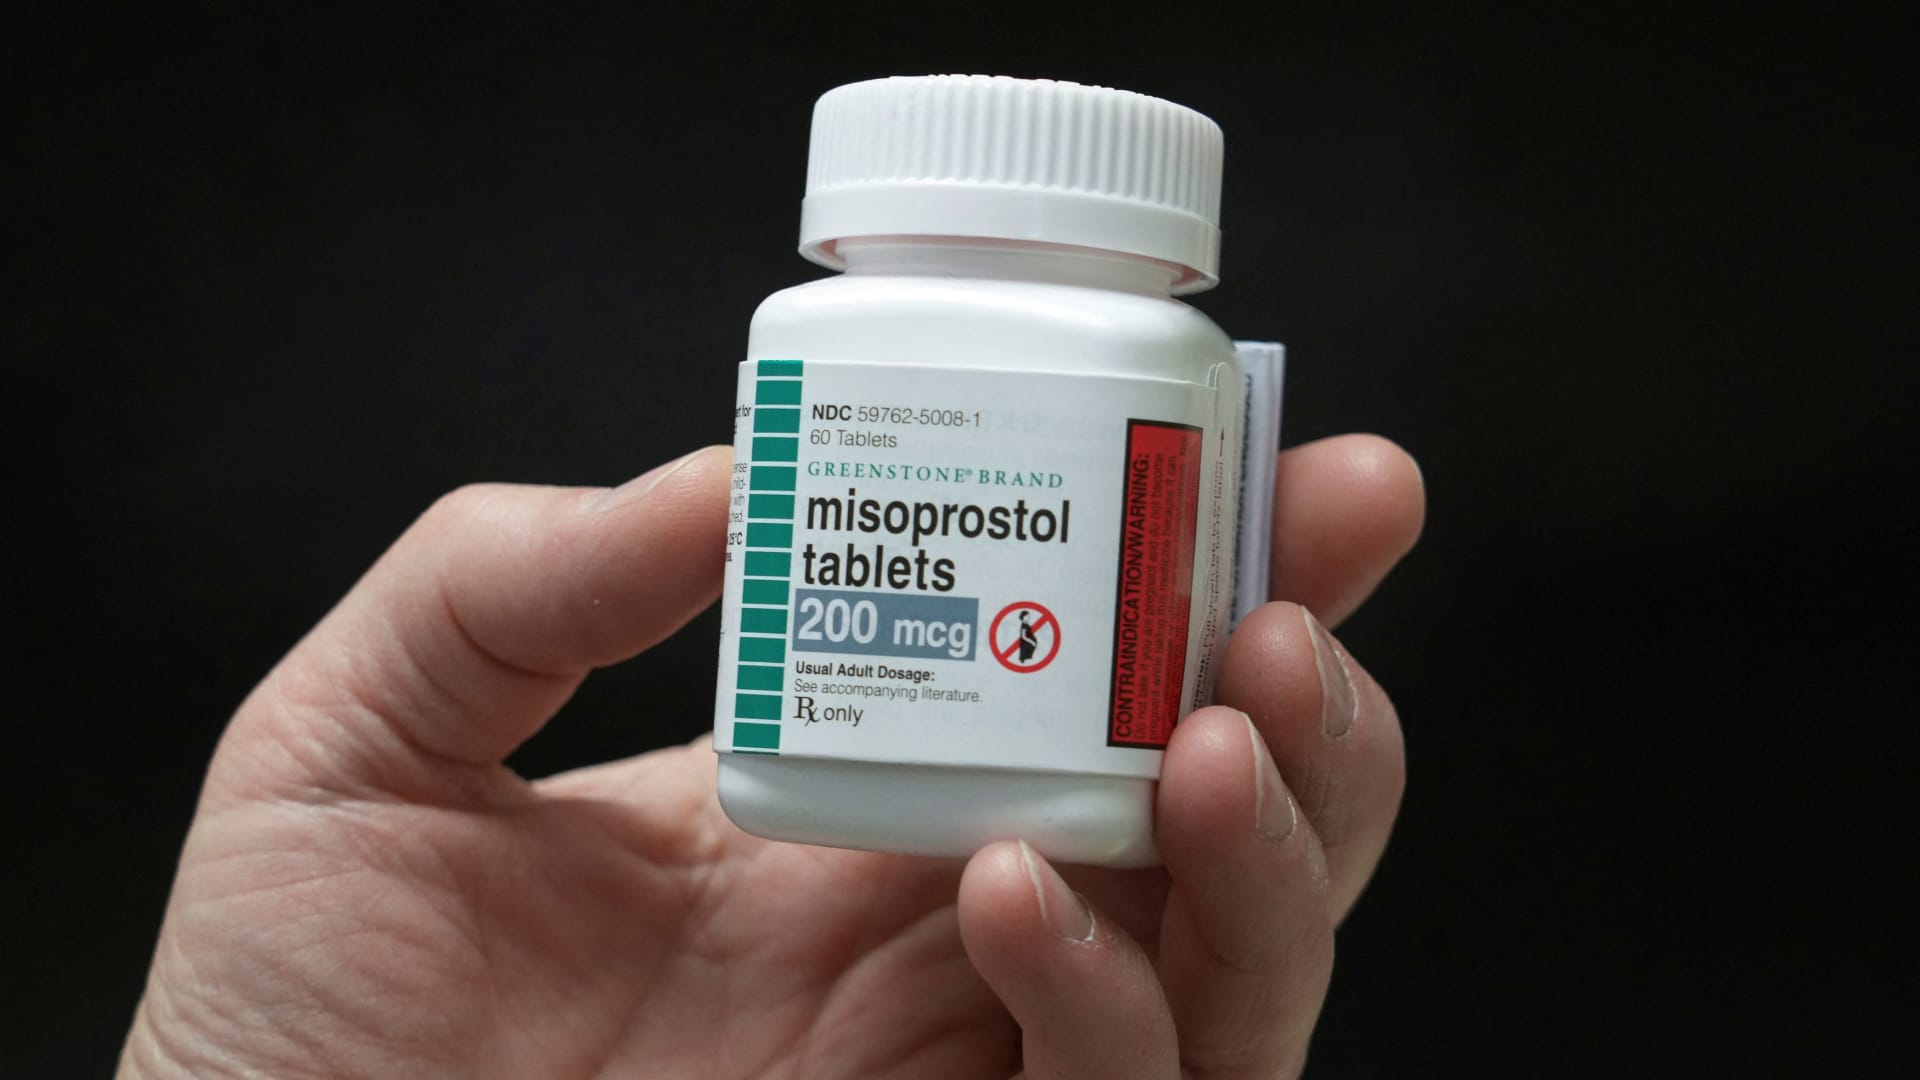 Abortion pill alternative: The drug that could be used if Texas ban on mifepristone upheld